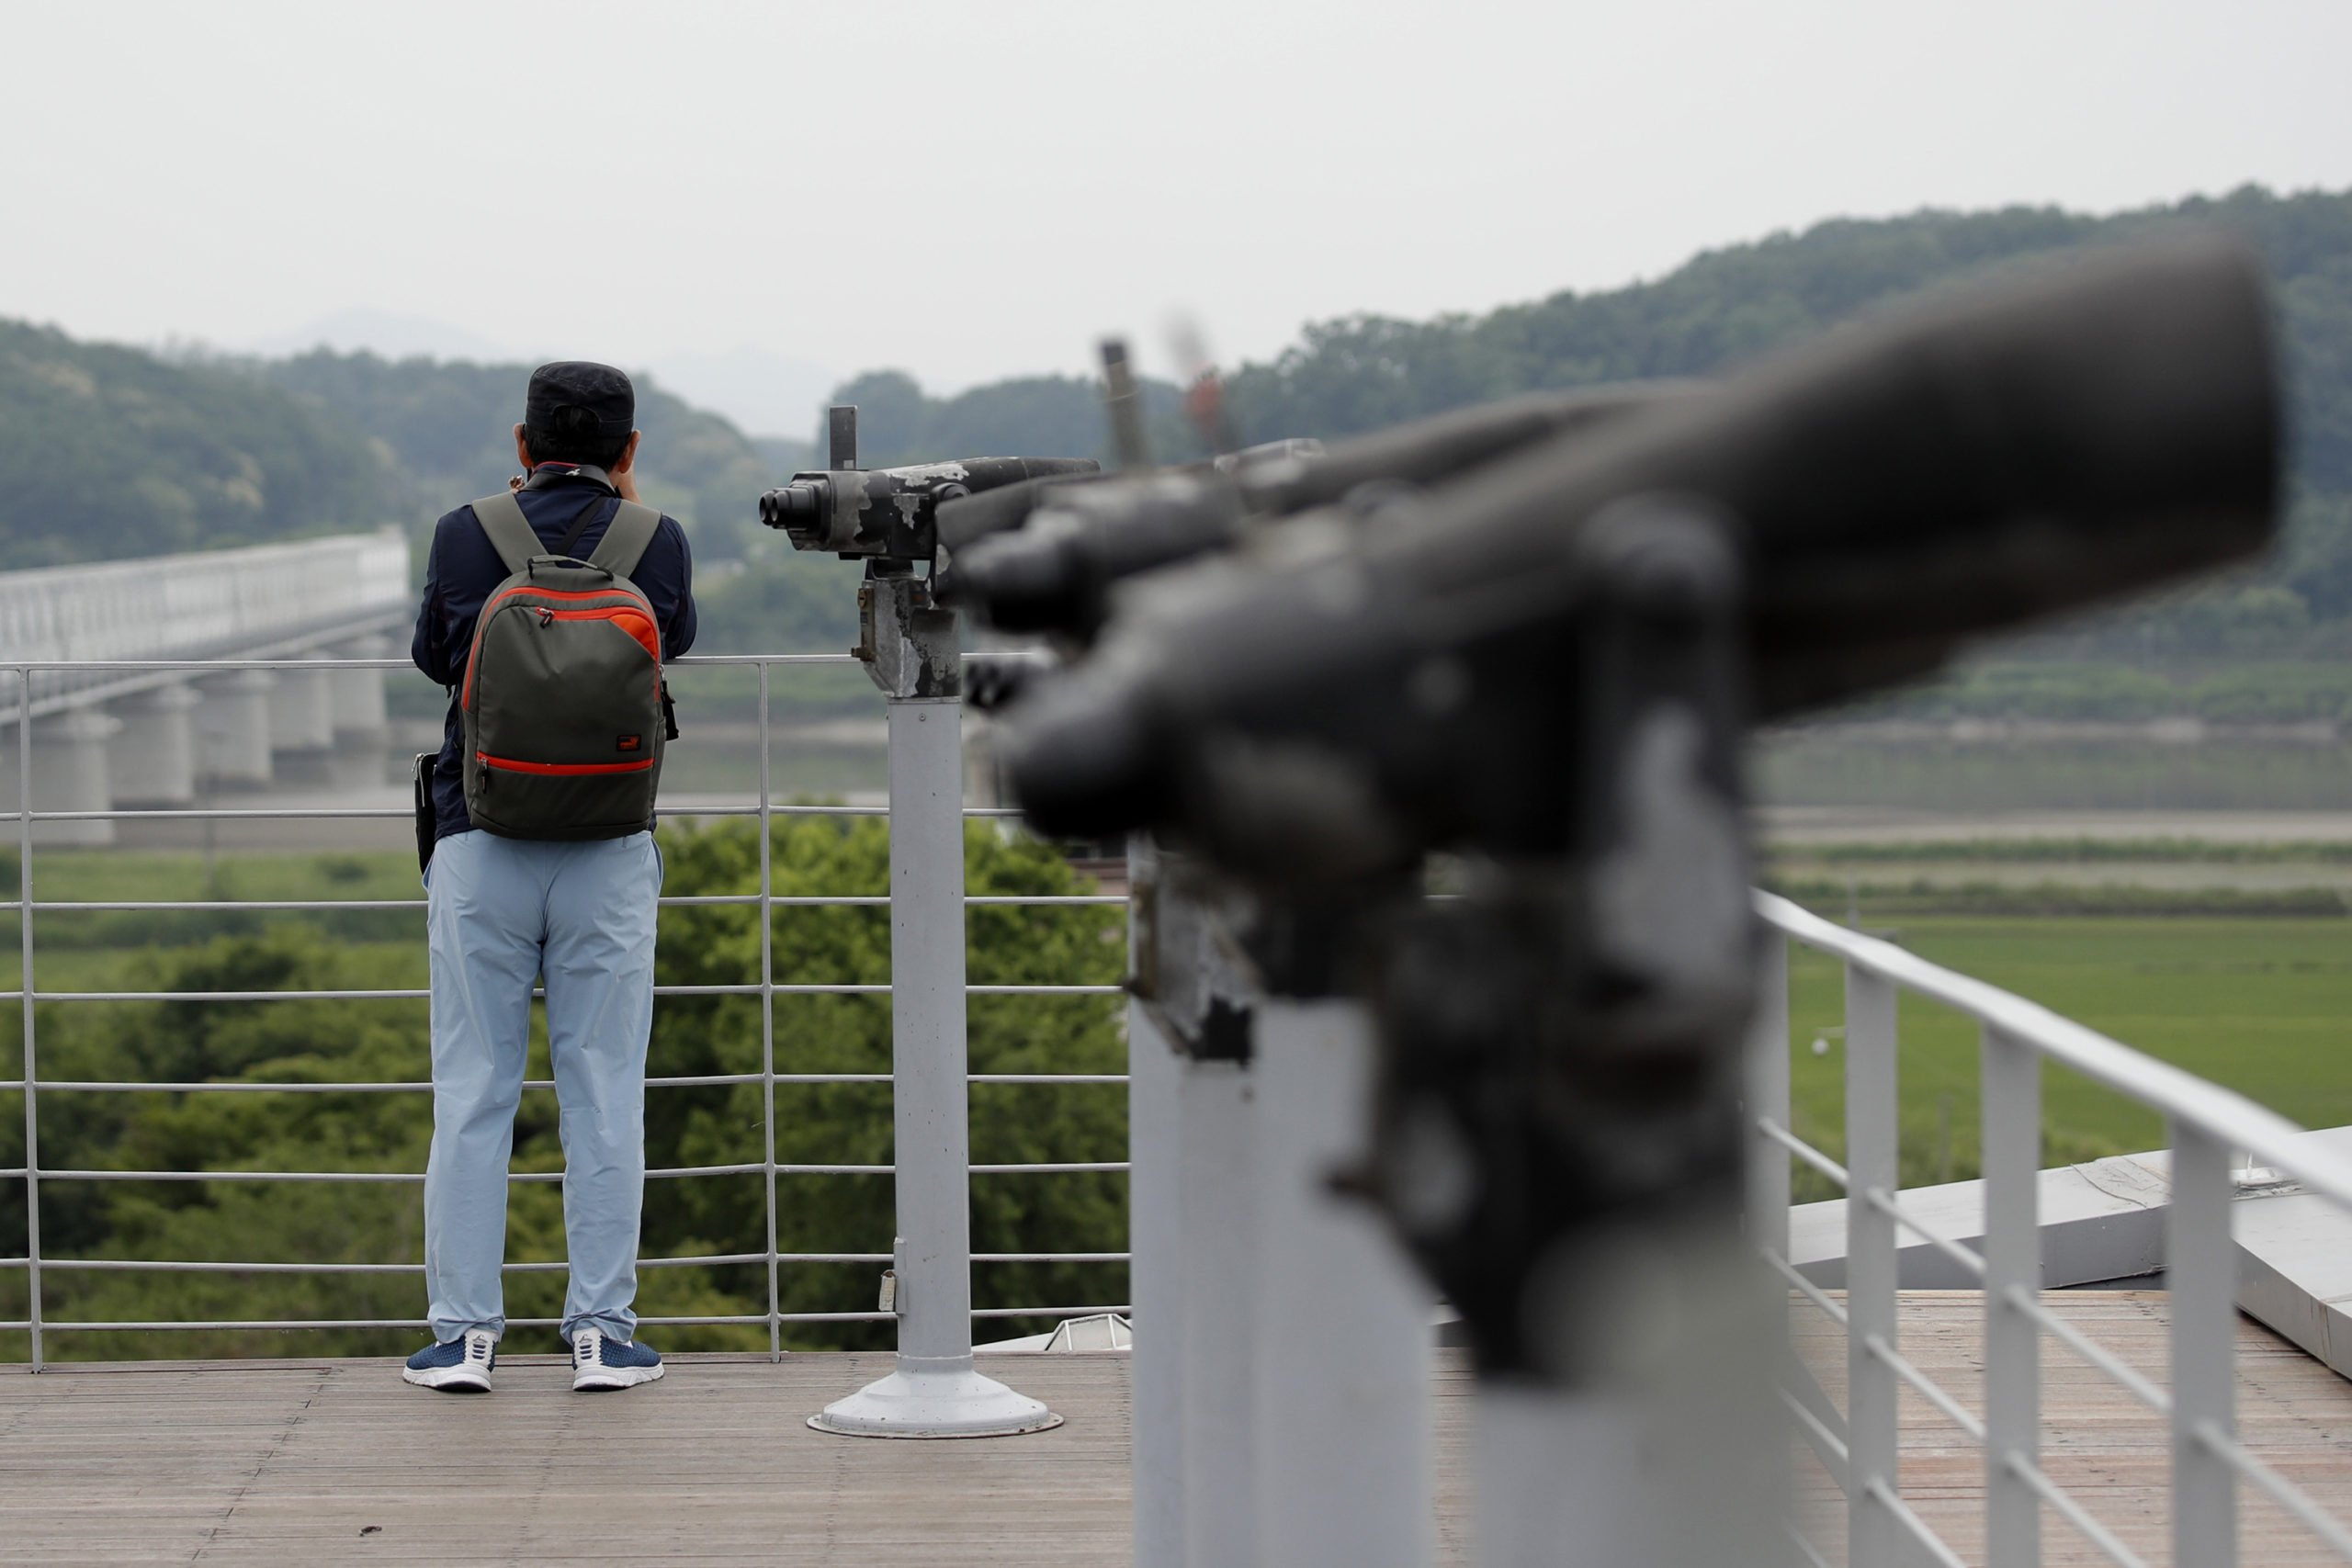 A visitor watches the northern side from the Imjingak Pavilion in Paju, South Korea, Thursday, June 18, 2020. Relations between the Koreas have been strained since a second Kim-Trump summit in early 2019 fell apart due to wrangling over the sanctions. (AP Photo/Lee Jin-man)